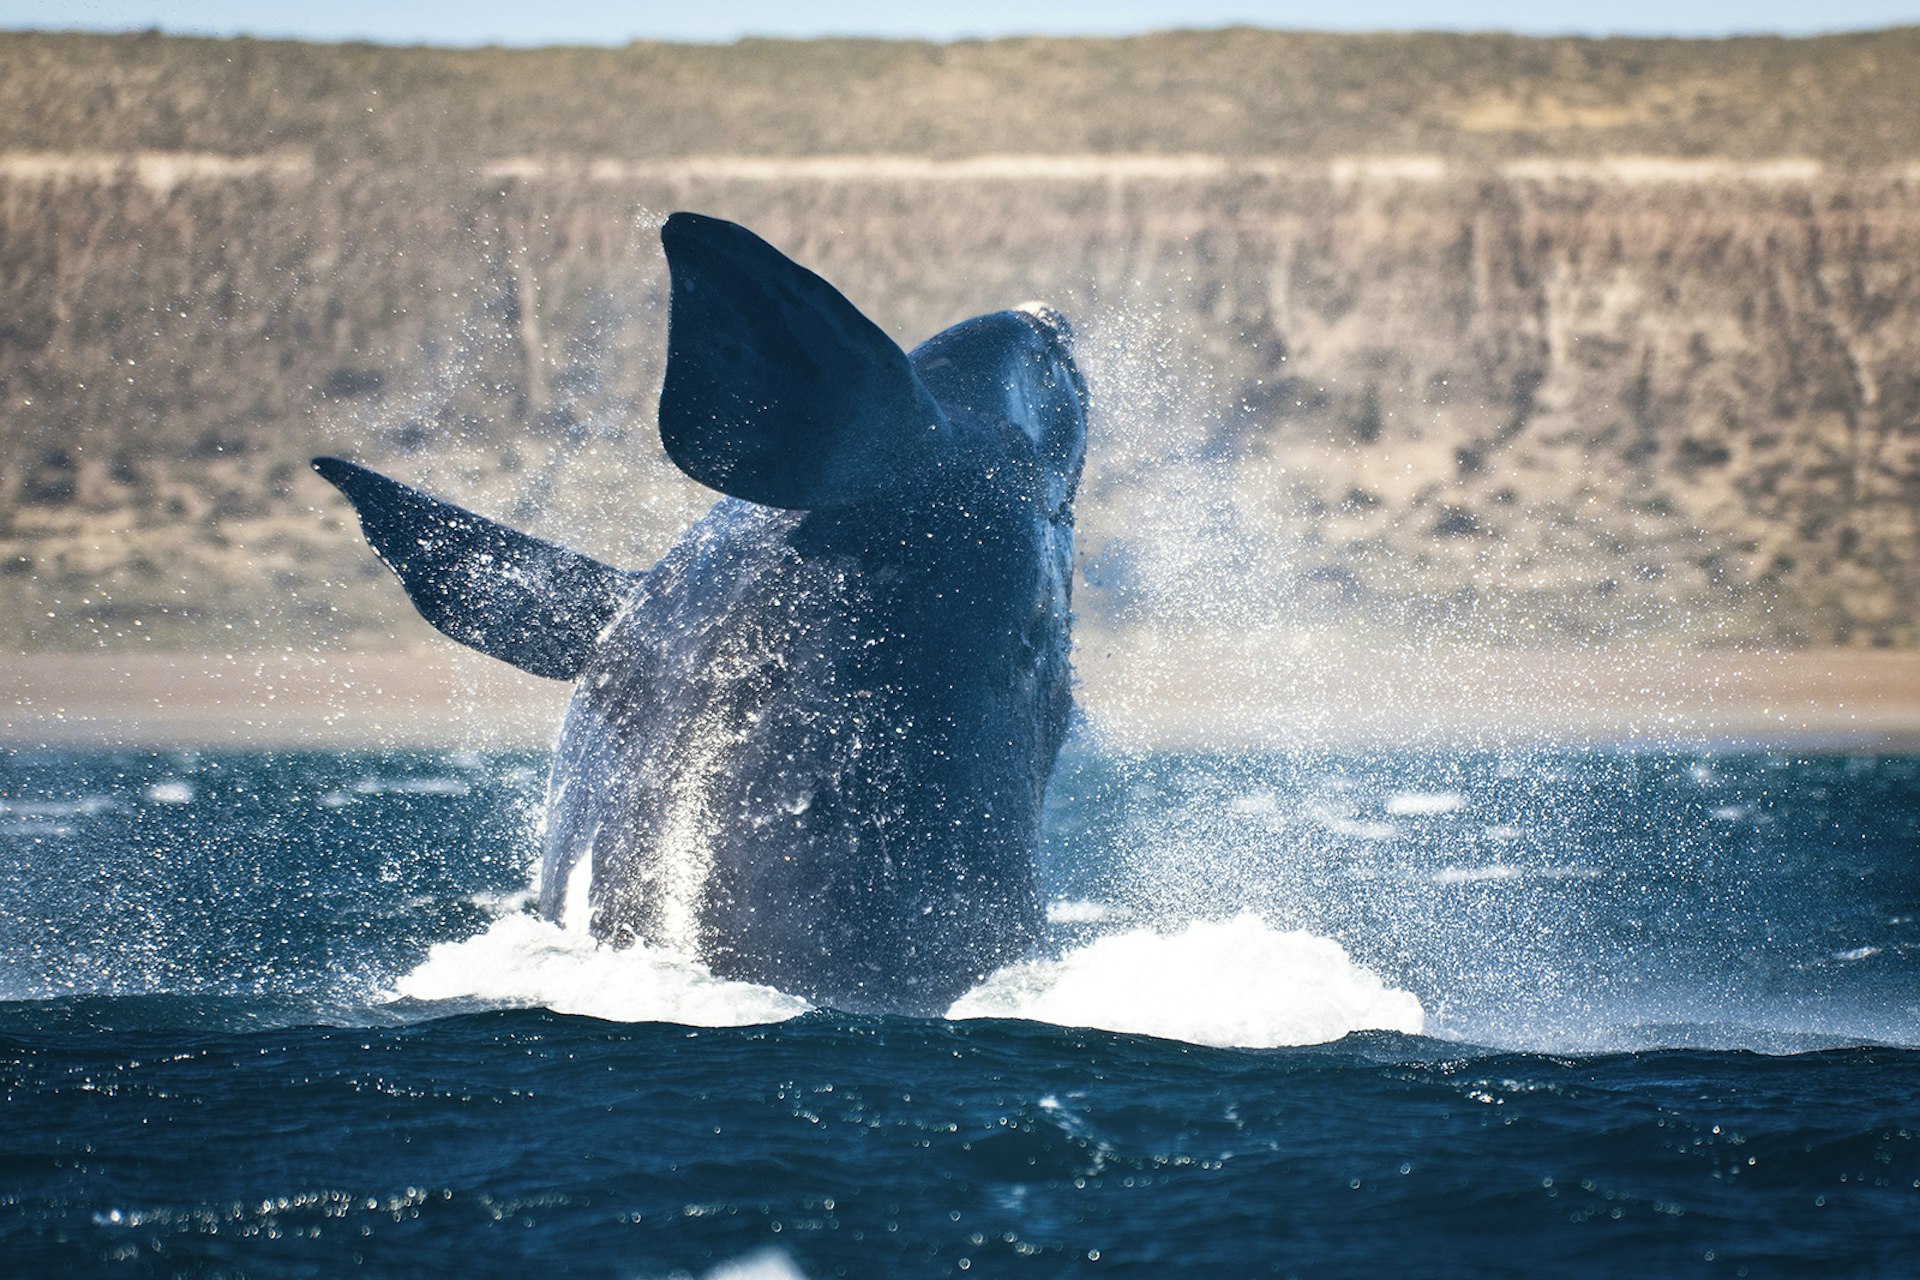 A large dark-colored whale jumps out of the water off the coast of Peninsula Valdés, Argentina